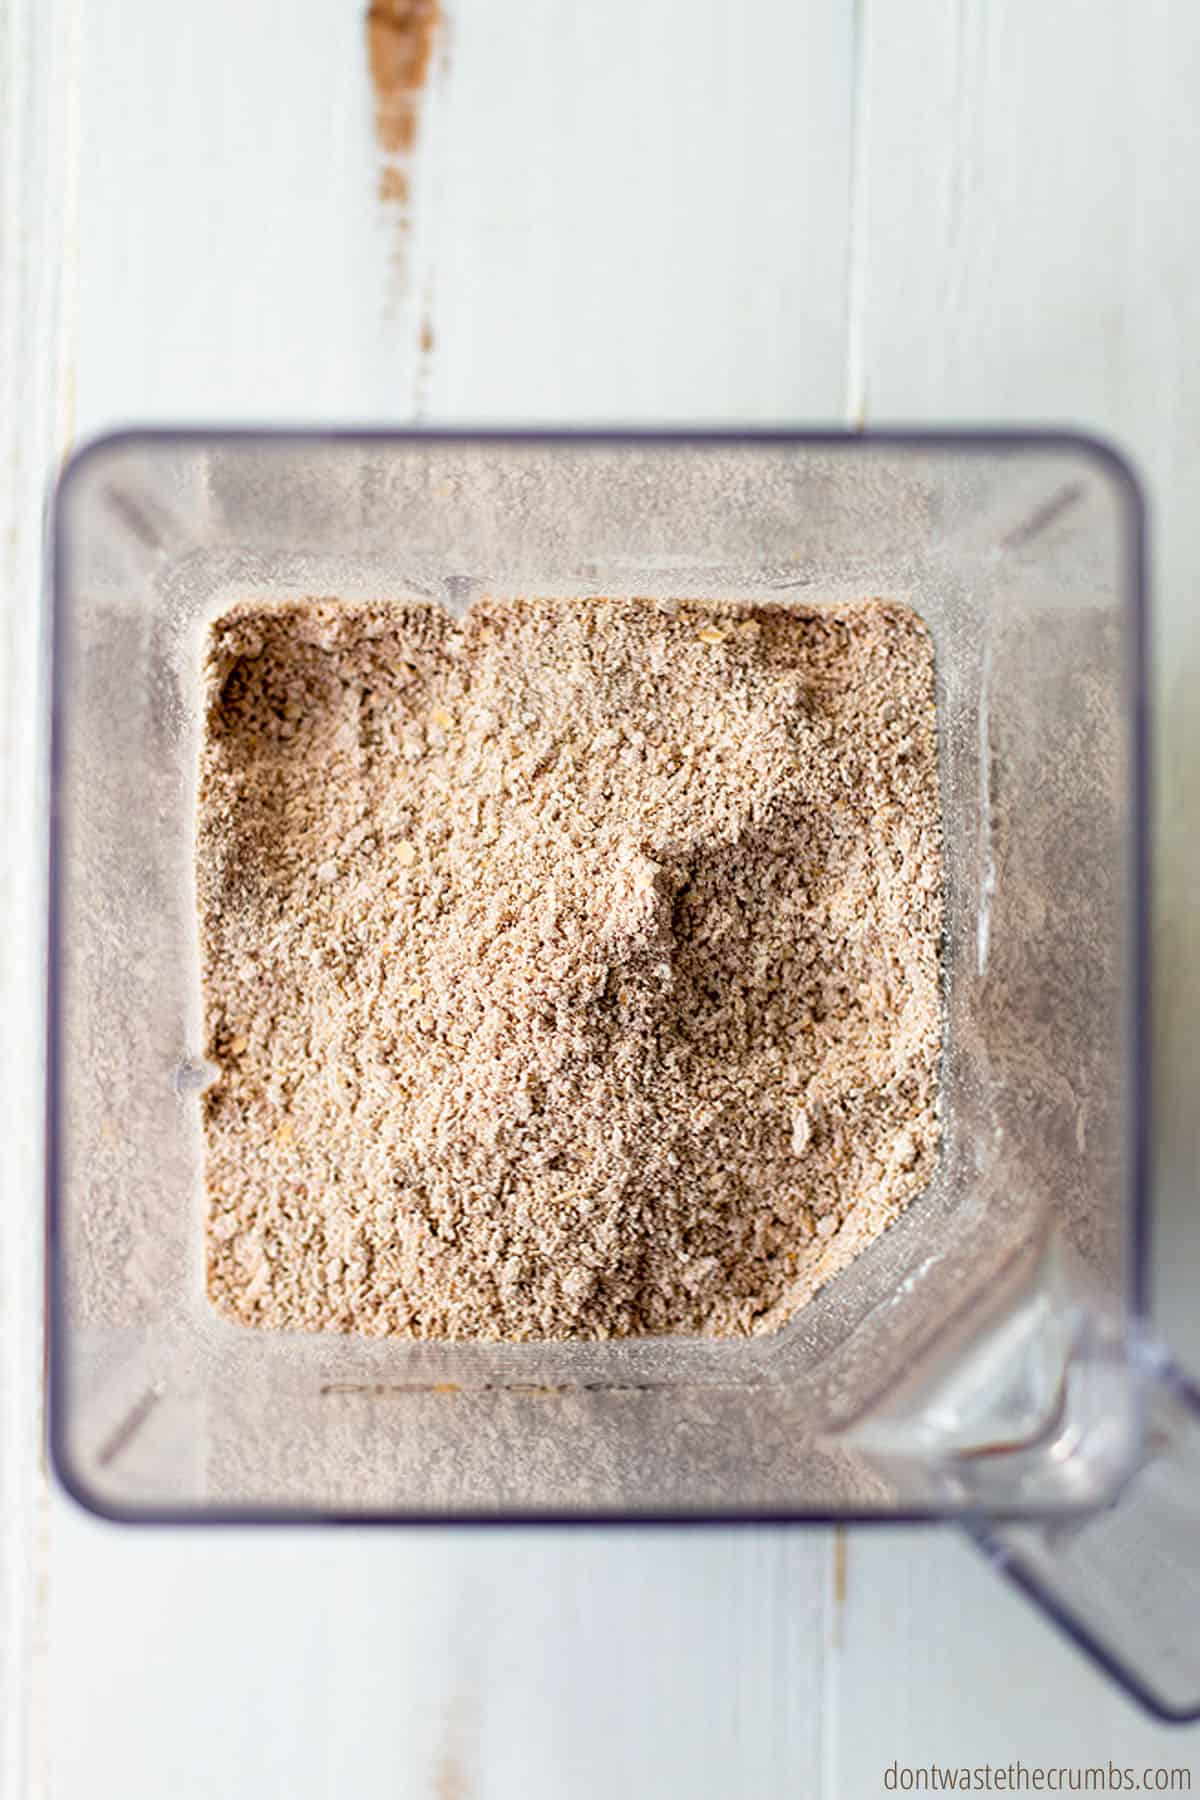 Freshly blended oat flour with other dry ingredients such as cinnamon in a blender.